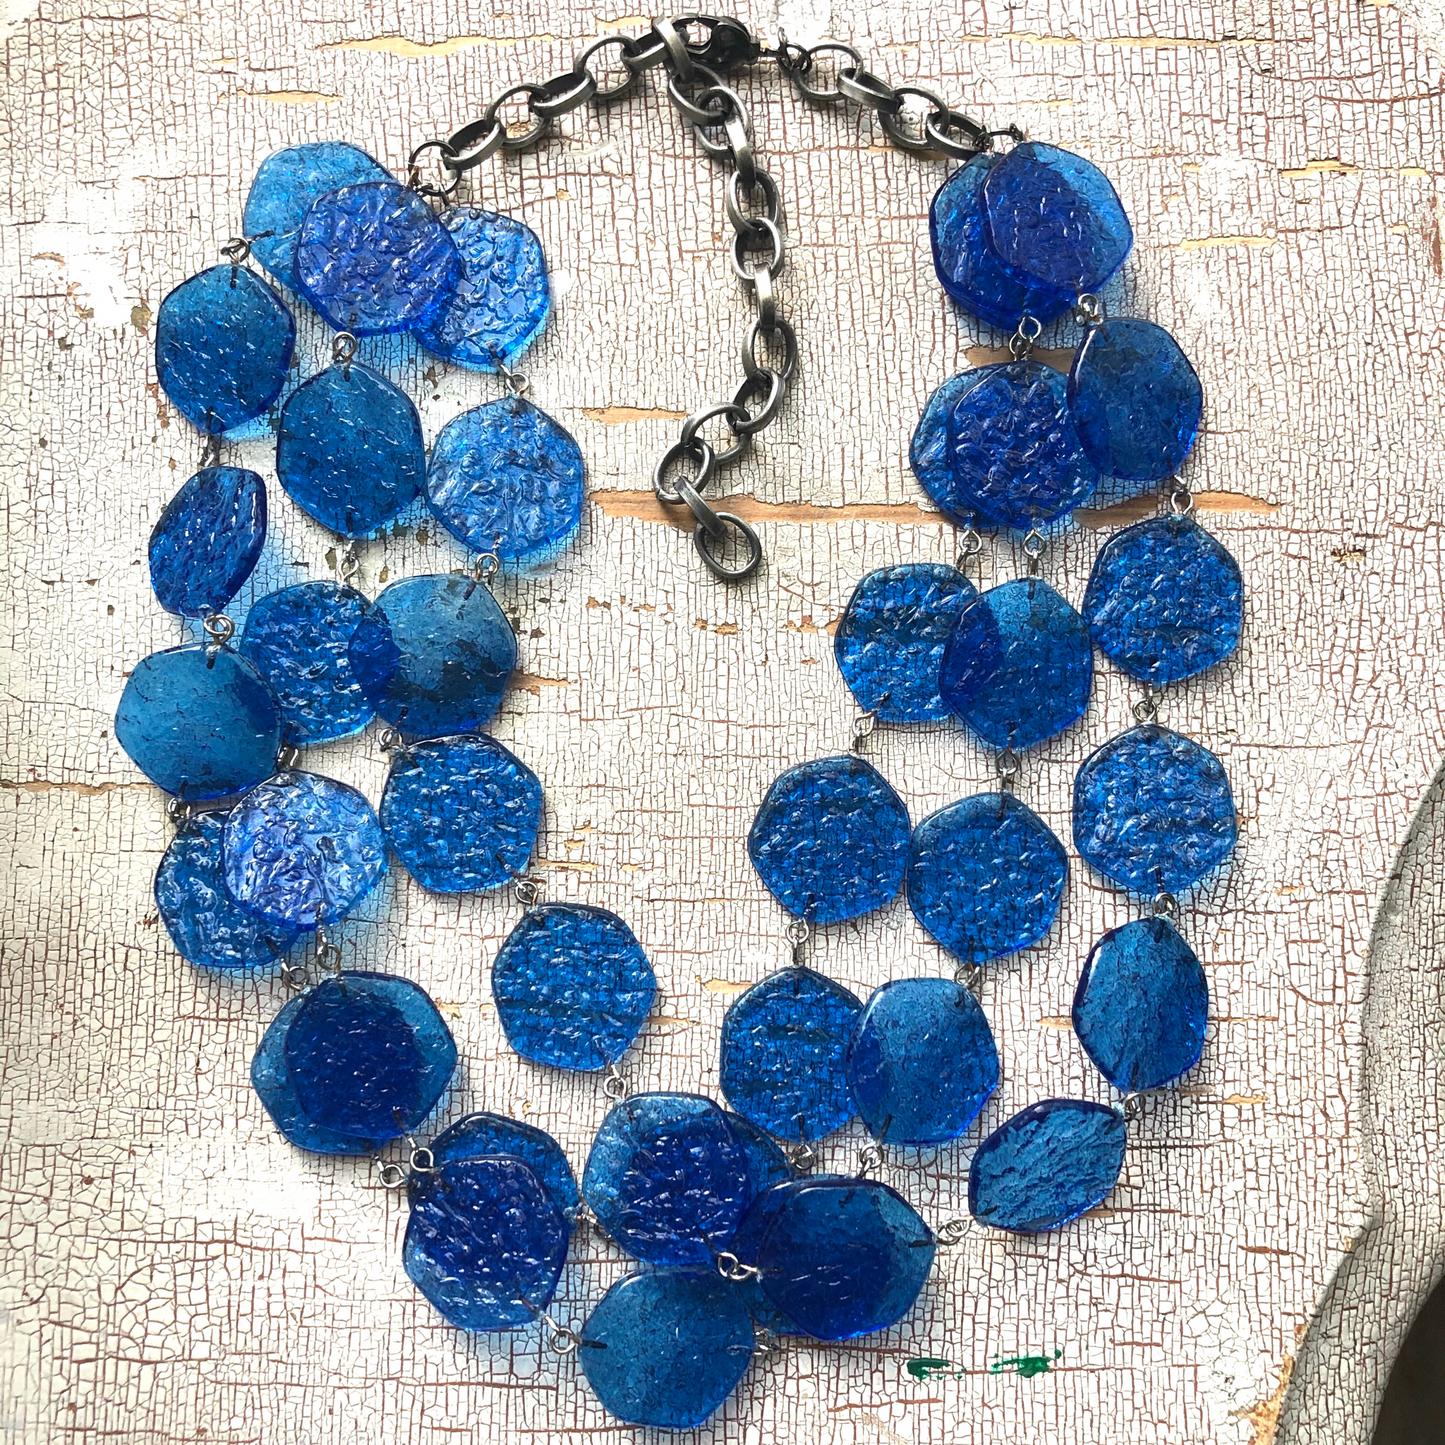 Aqua Blue 'Stained Glass' Ice Chip Necklace